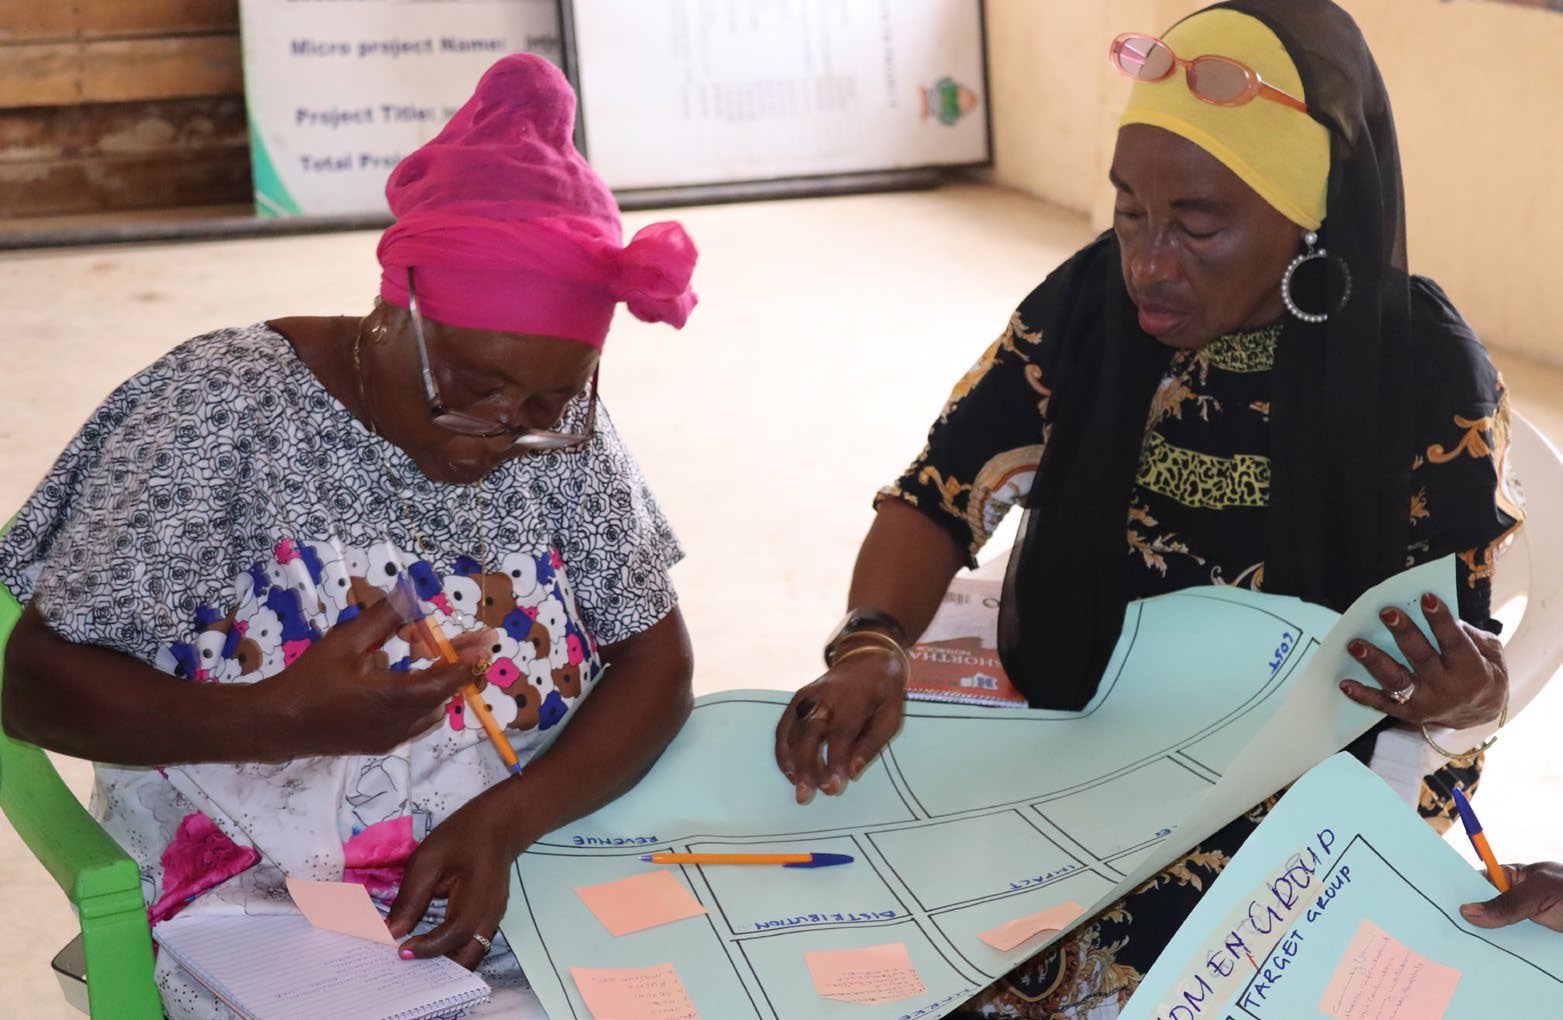 How the BE project is using inclusive business models to empower coastal women in Kenya